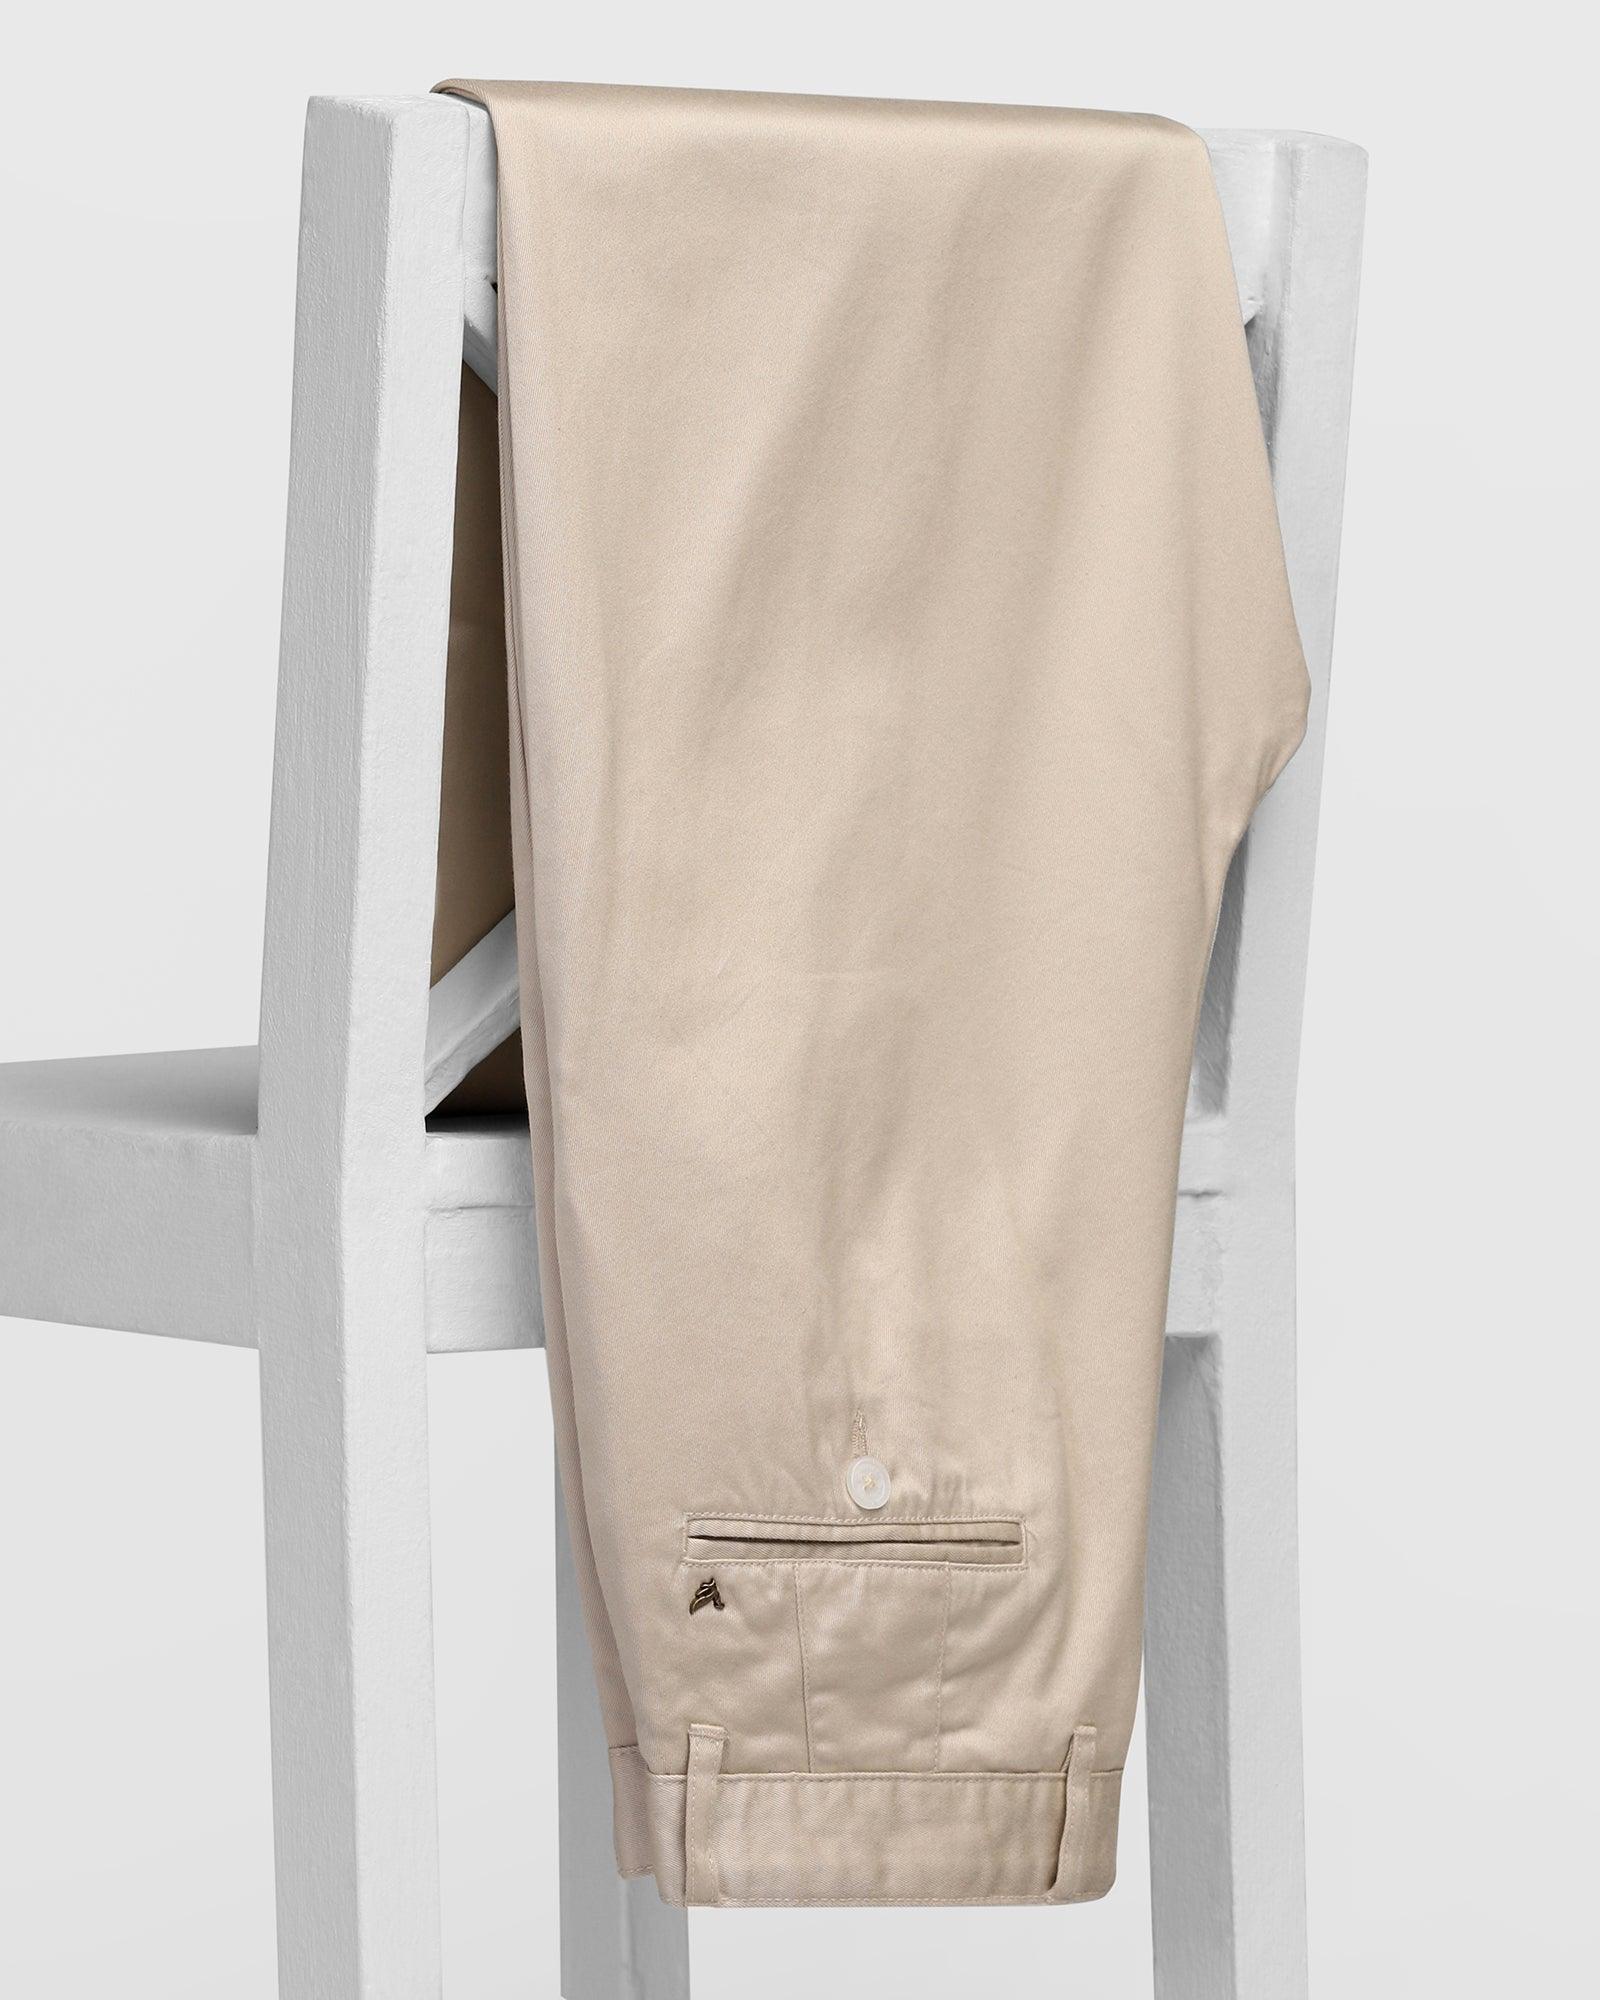 Straight Comfort B-88P Casual Beige Solid Khakis - Knight Rider